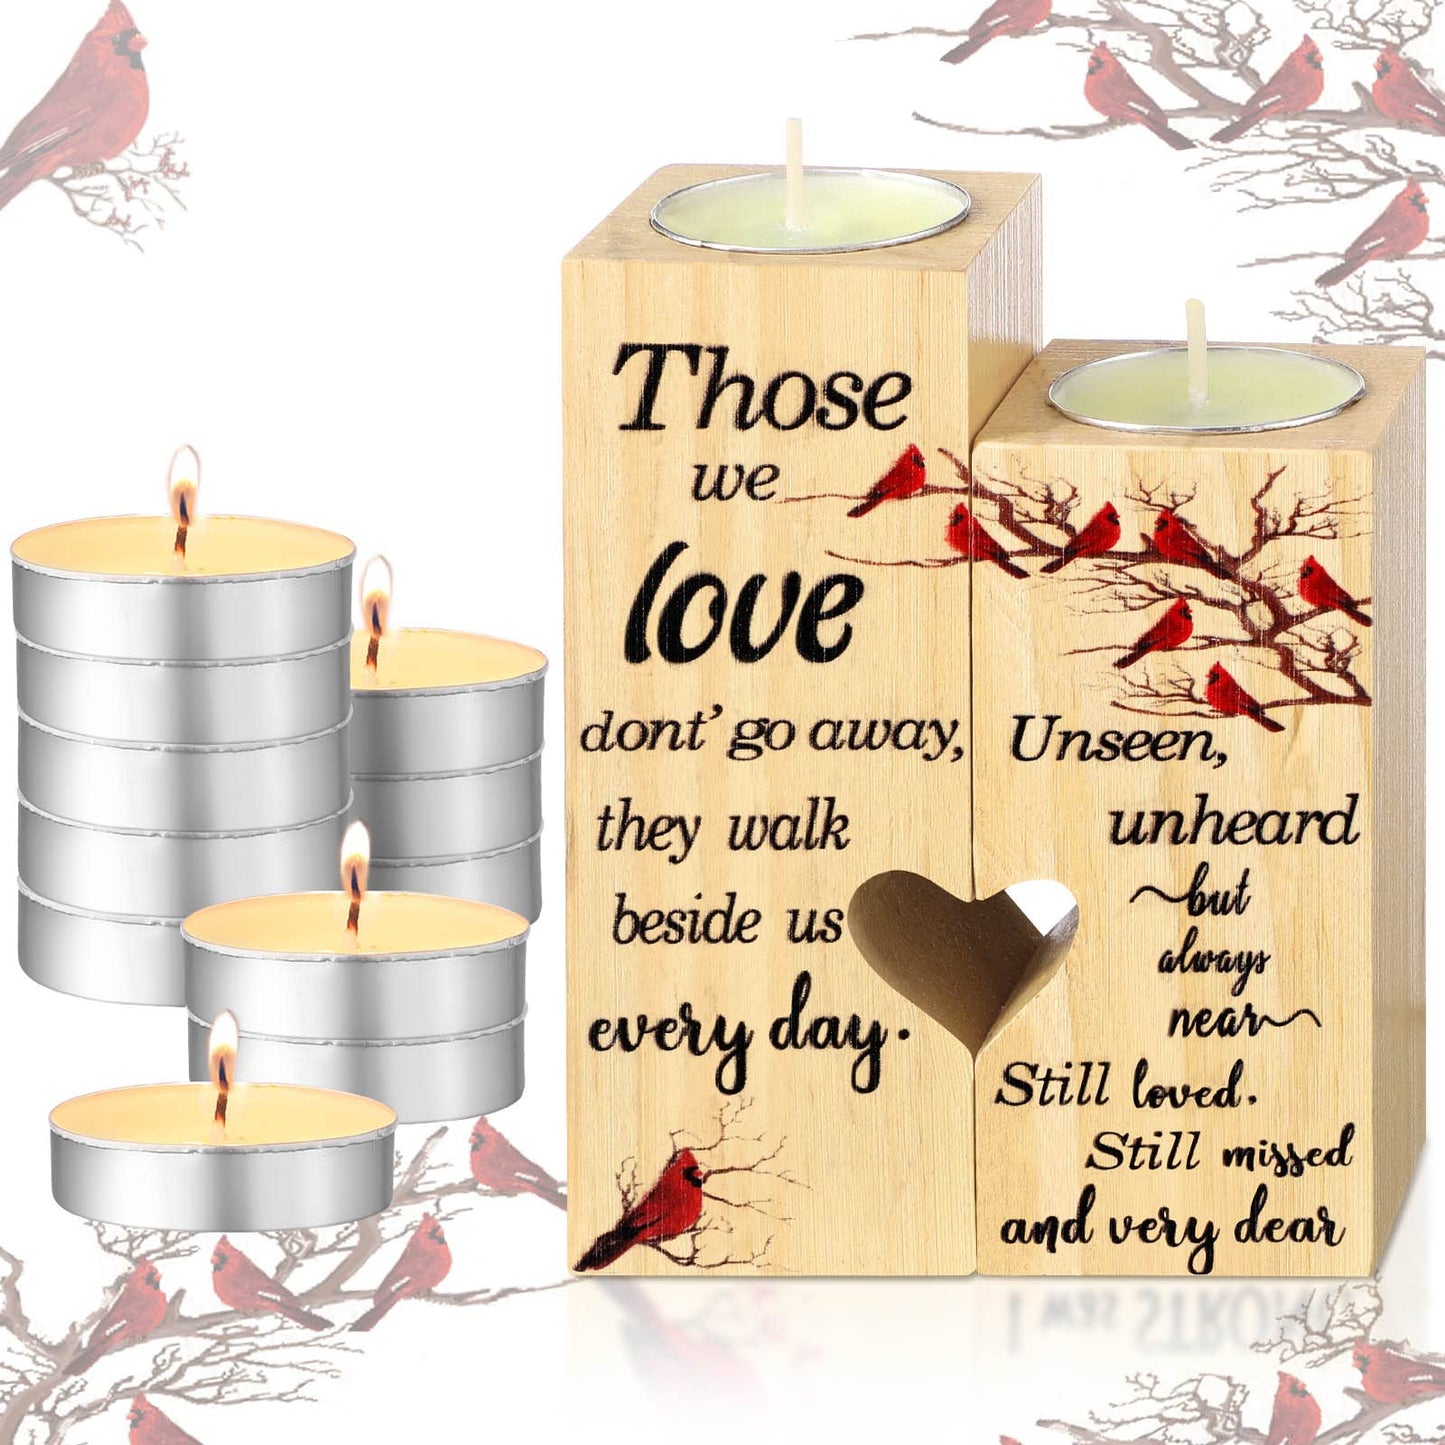 Memorial Gift Sympathy Candles for Loss of Loved One Red Cardinal Sympathy Gift Bereavement Gift Memorial Wooden Candle Holder and 10 Pcs Candles Memory of Loved One Gifts (Those We Love)